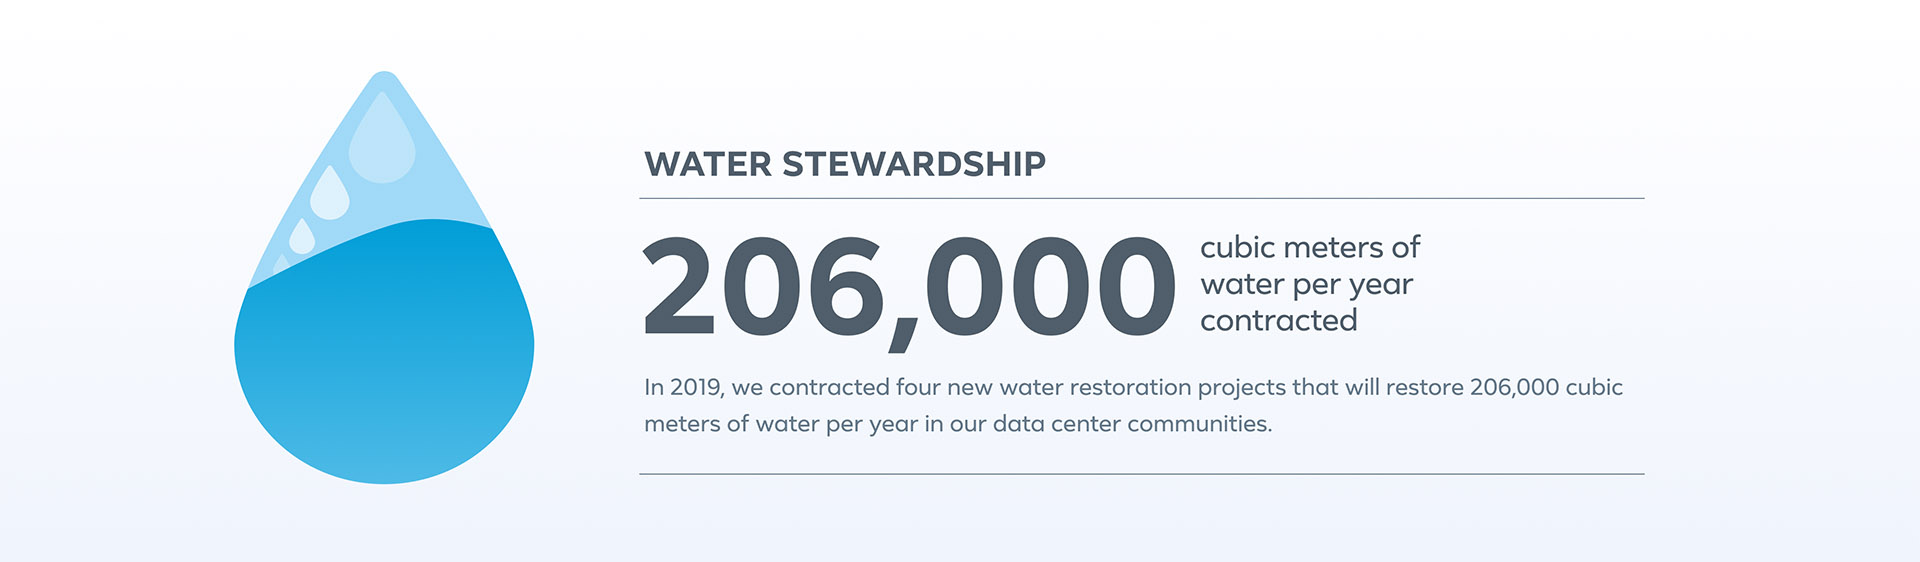 We’re investing in water restoration projects that will replenish 206,000 cubic meters (55 million gallons) of water per year.